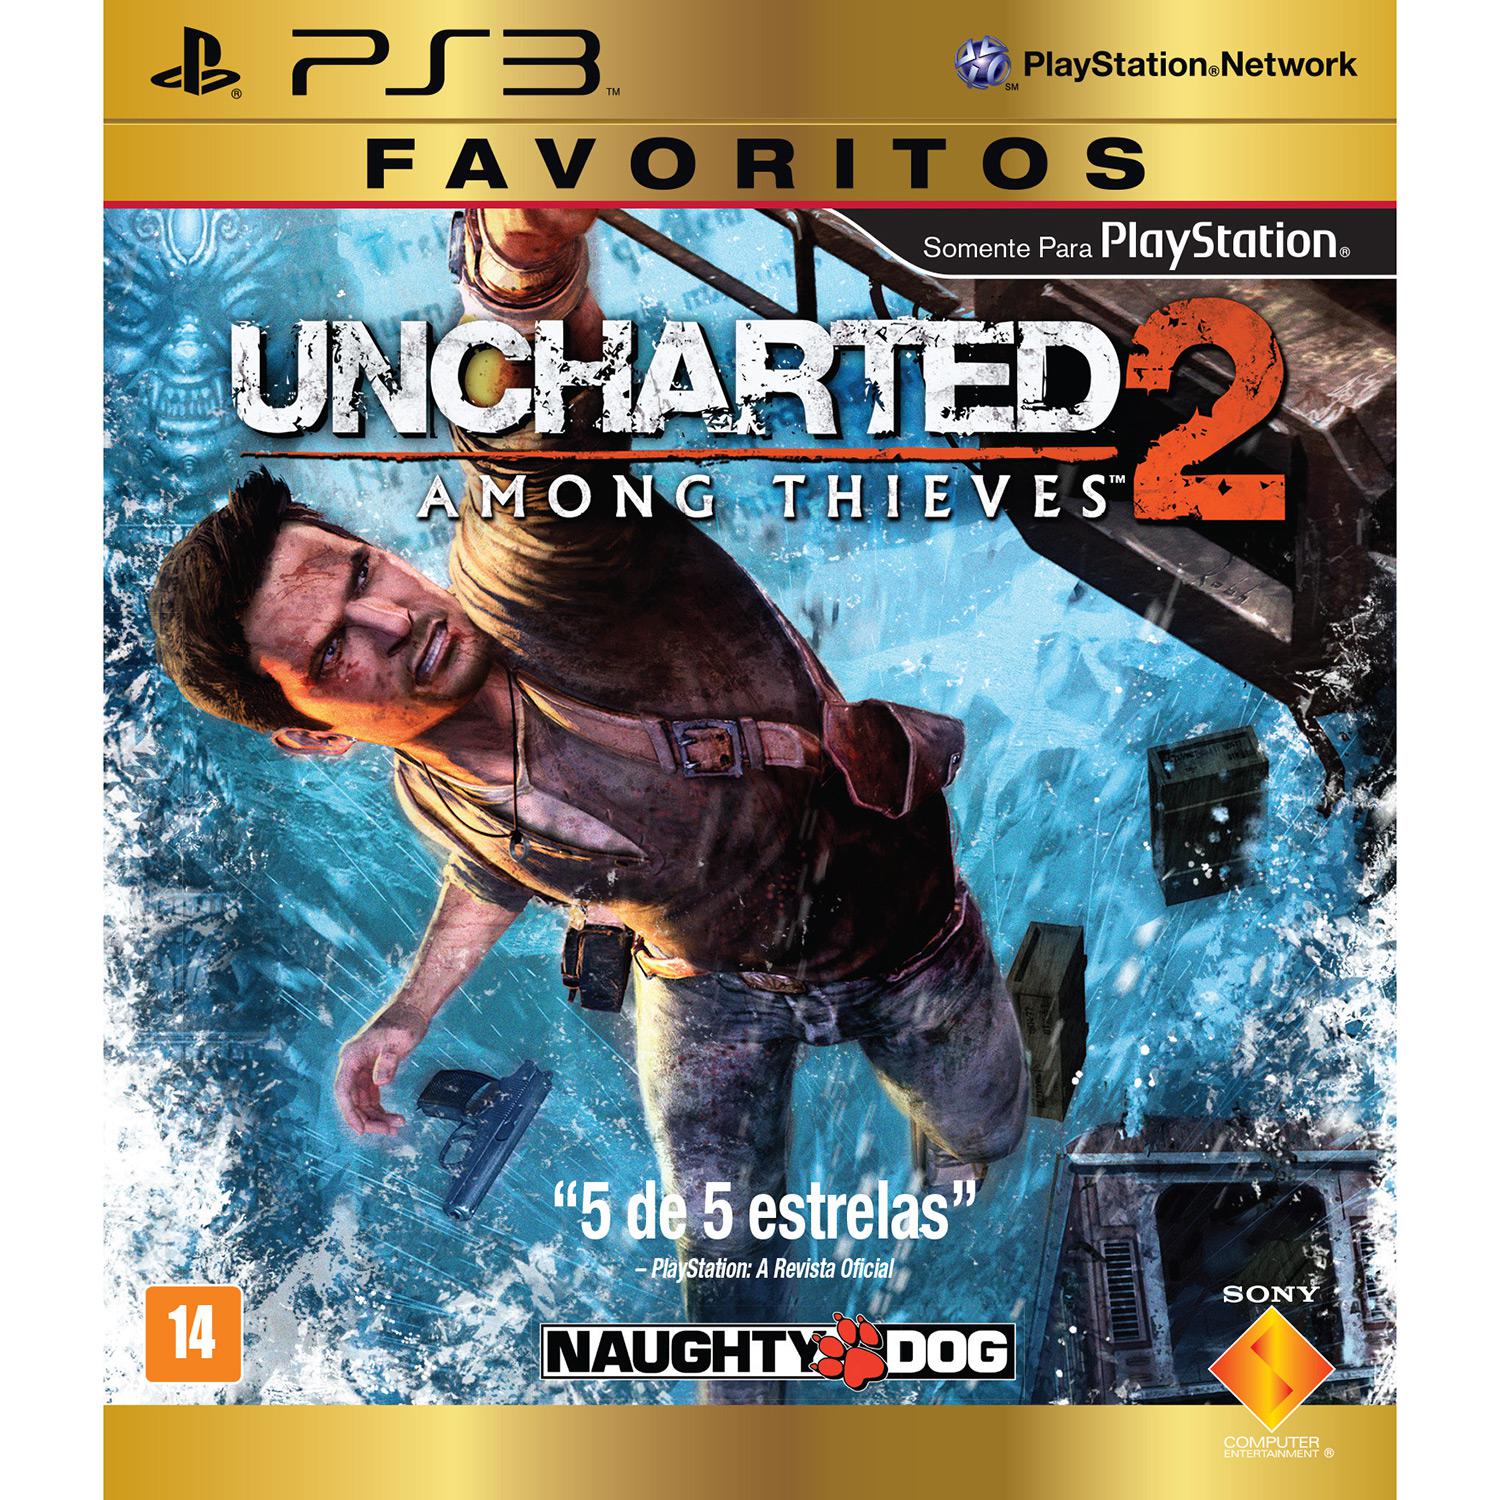 Game Uncharted 2: Among Thieves - Favoritos - PS3 é bom? Vale a pena?